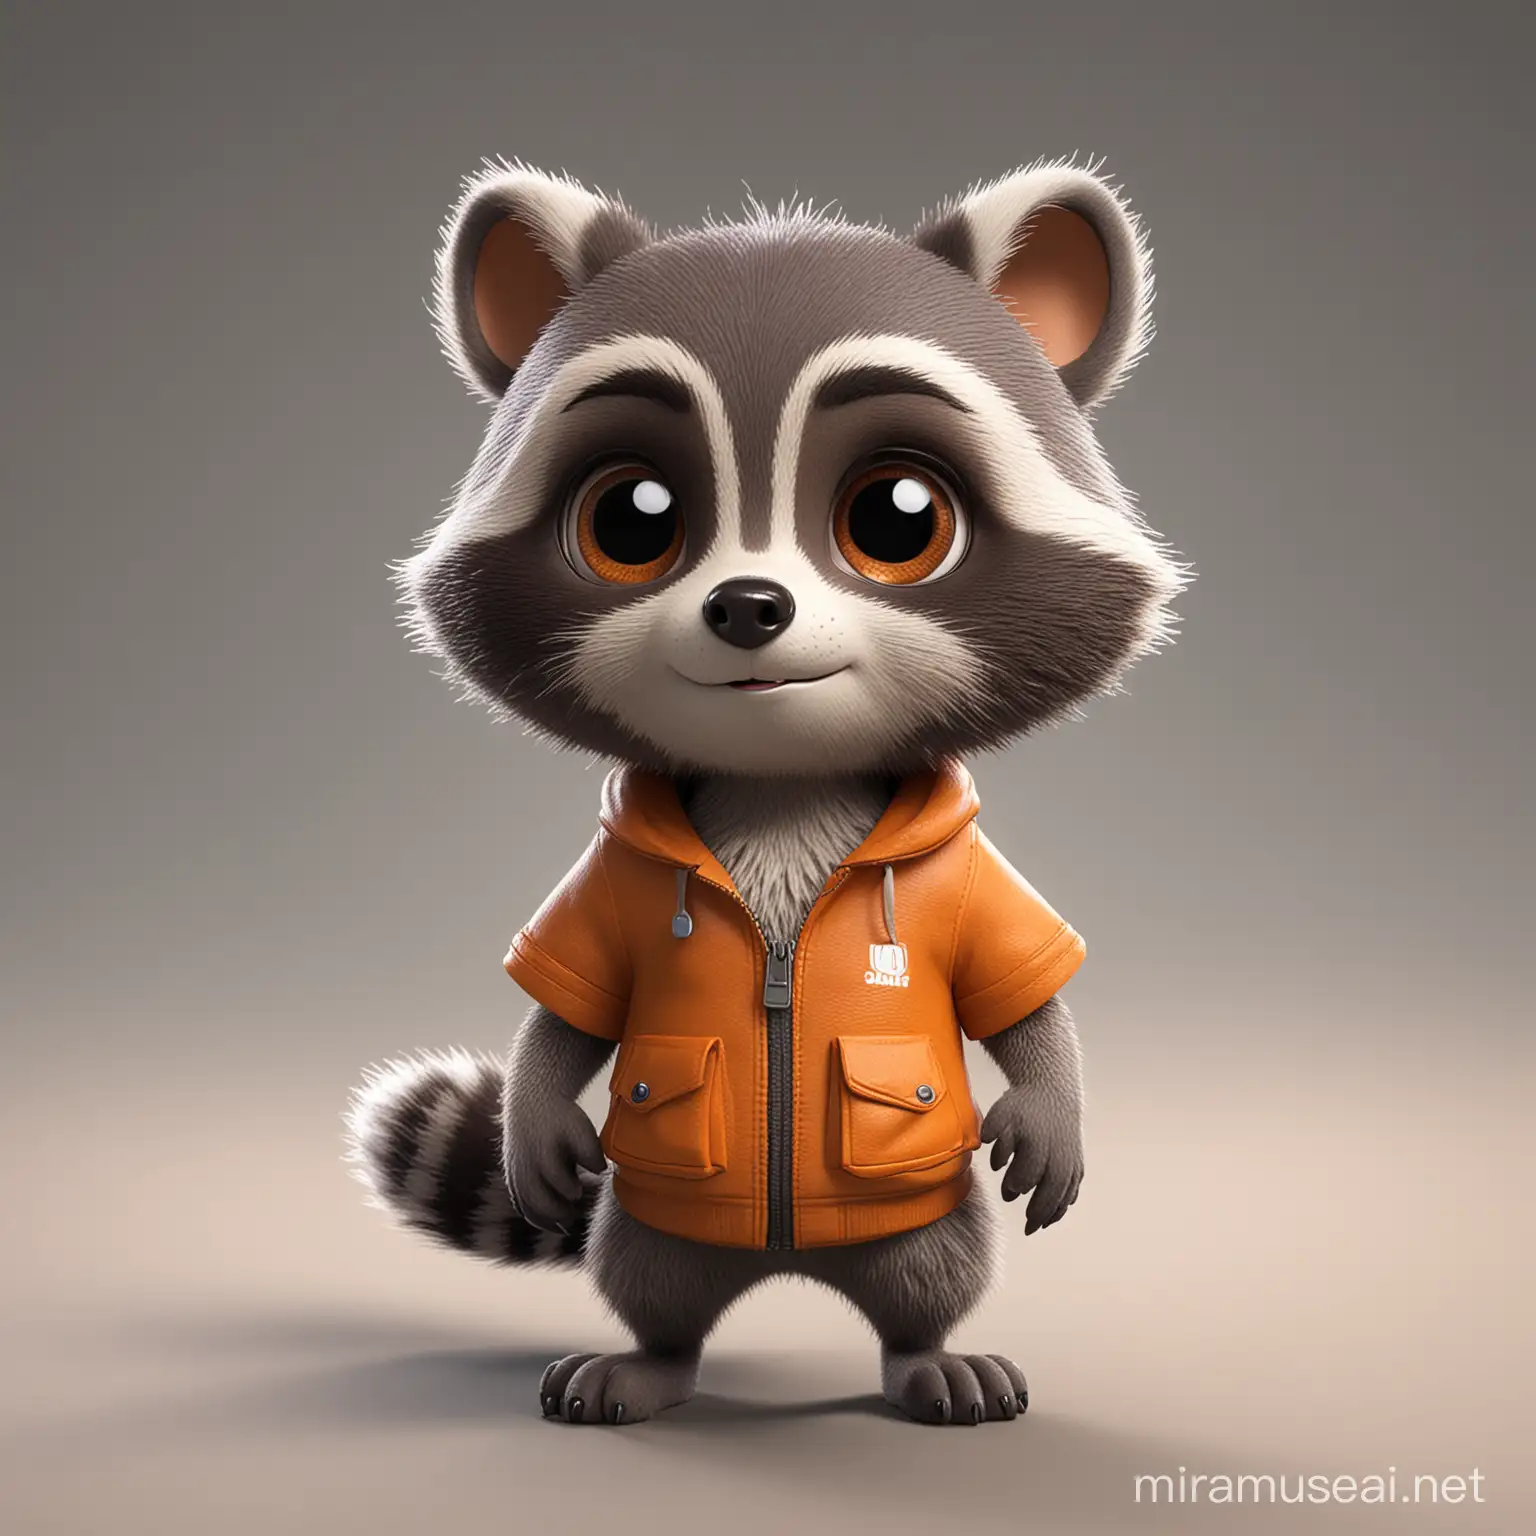 3D cute chibi racoon, pixar cartoon and 3d anime style, saturated colors, extrelemy simple and plain textures, high resolution